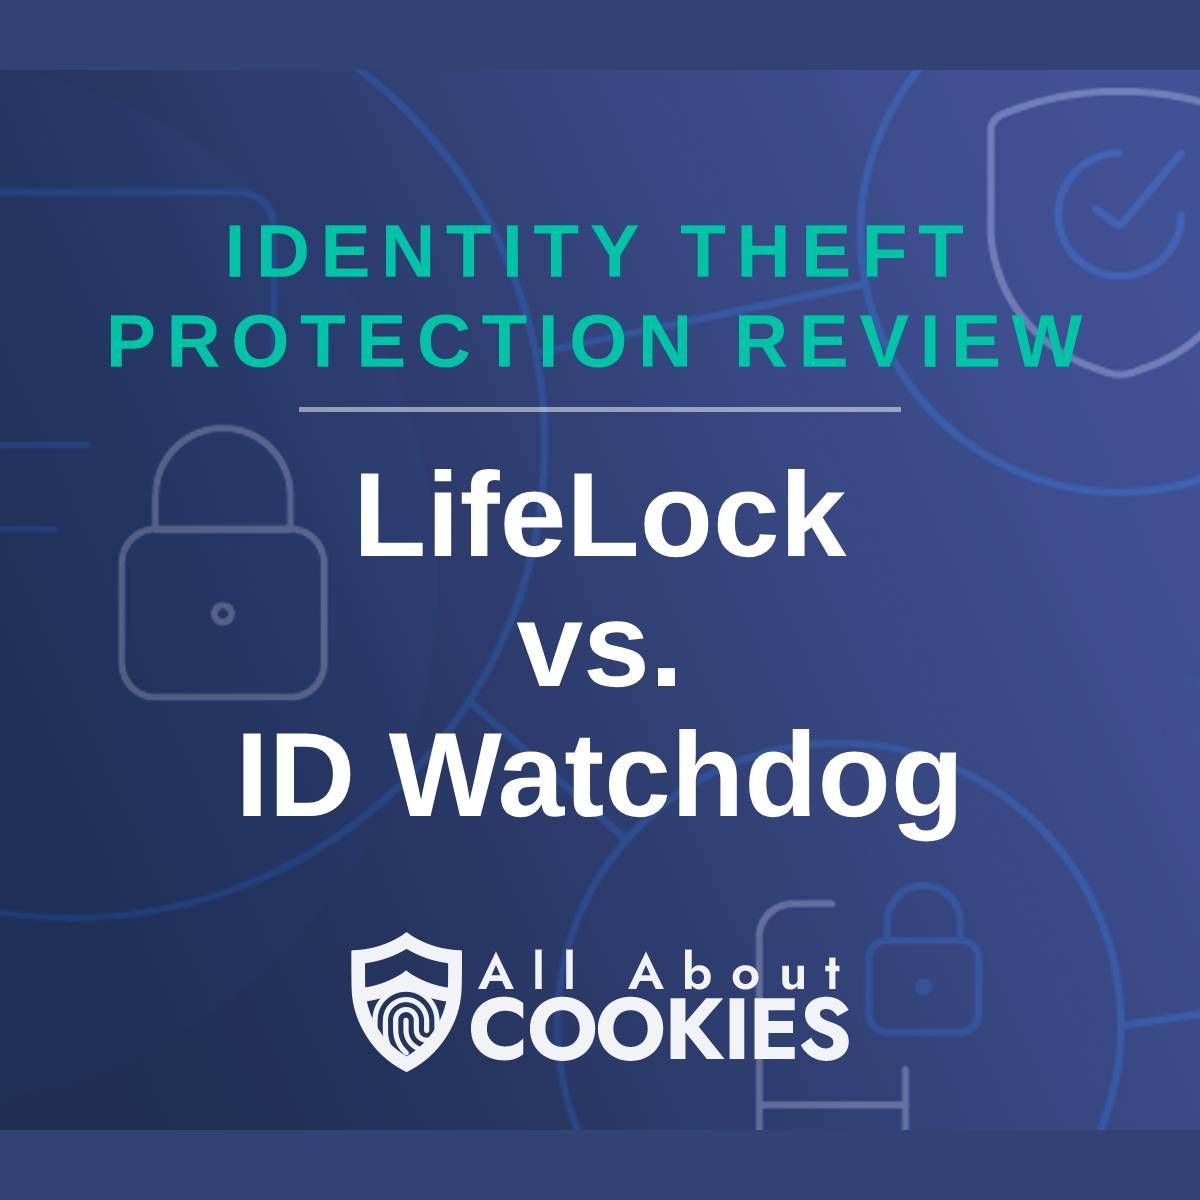 A blue background with images of locks and shields with the text &quot;Identity Theft Protection Review LifeLock vs. ID Watchdog&quot; and the All About Cookies logo. 